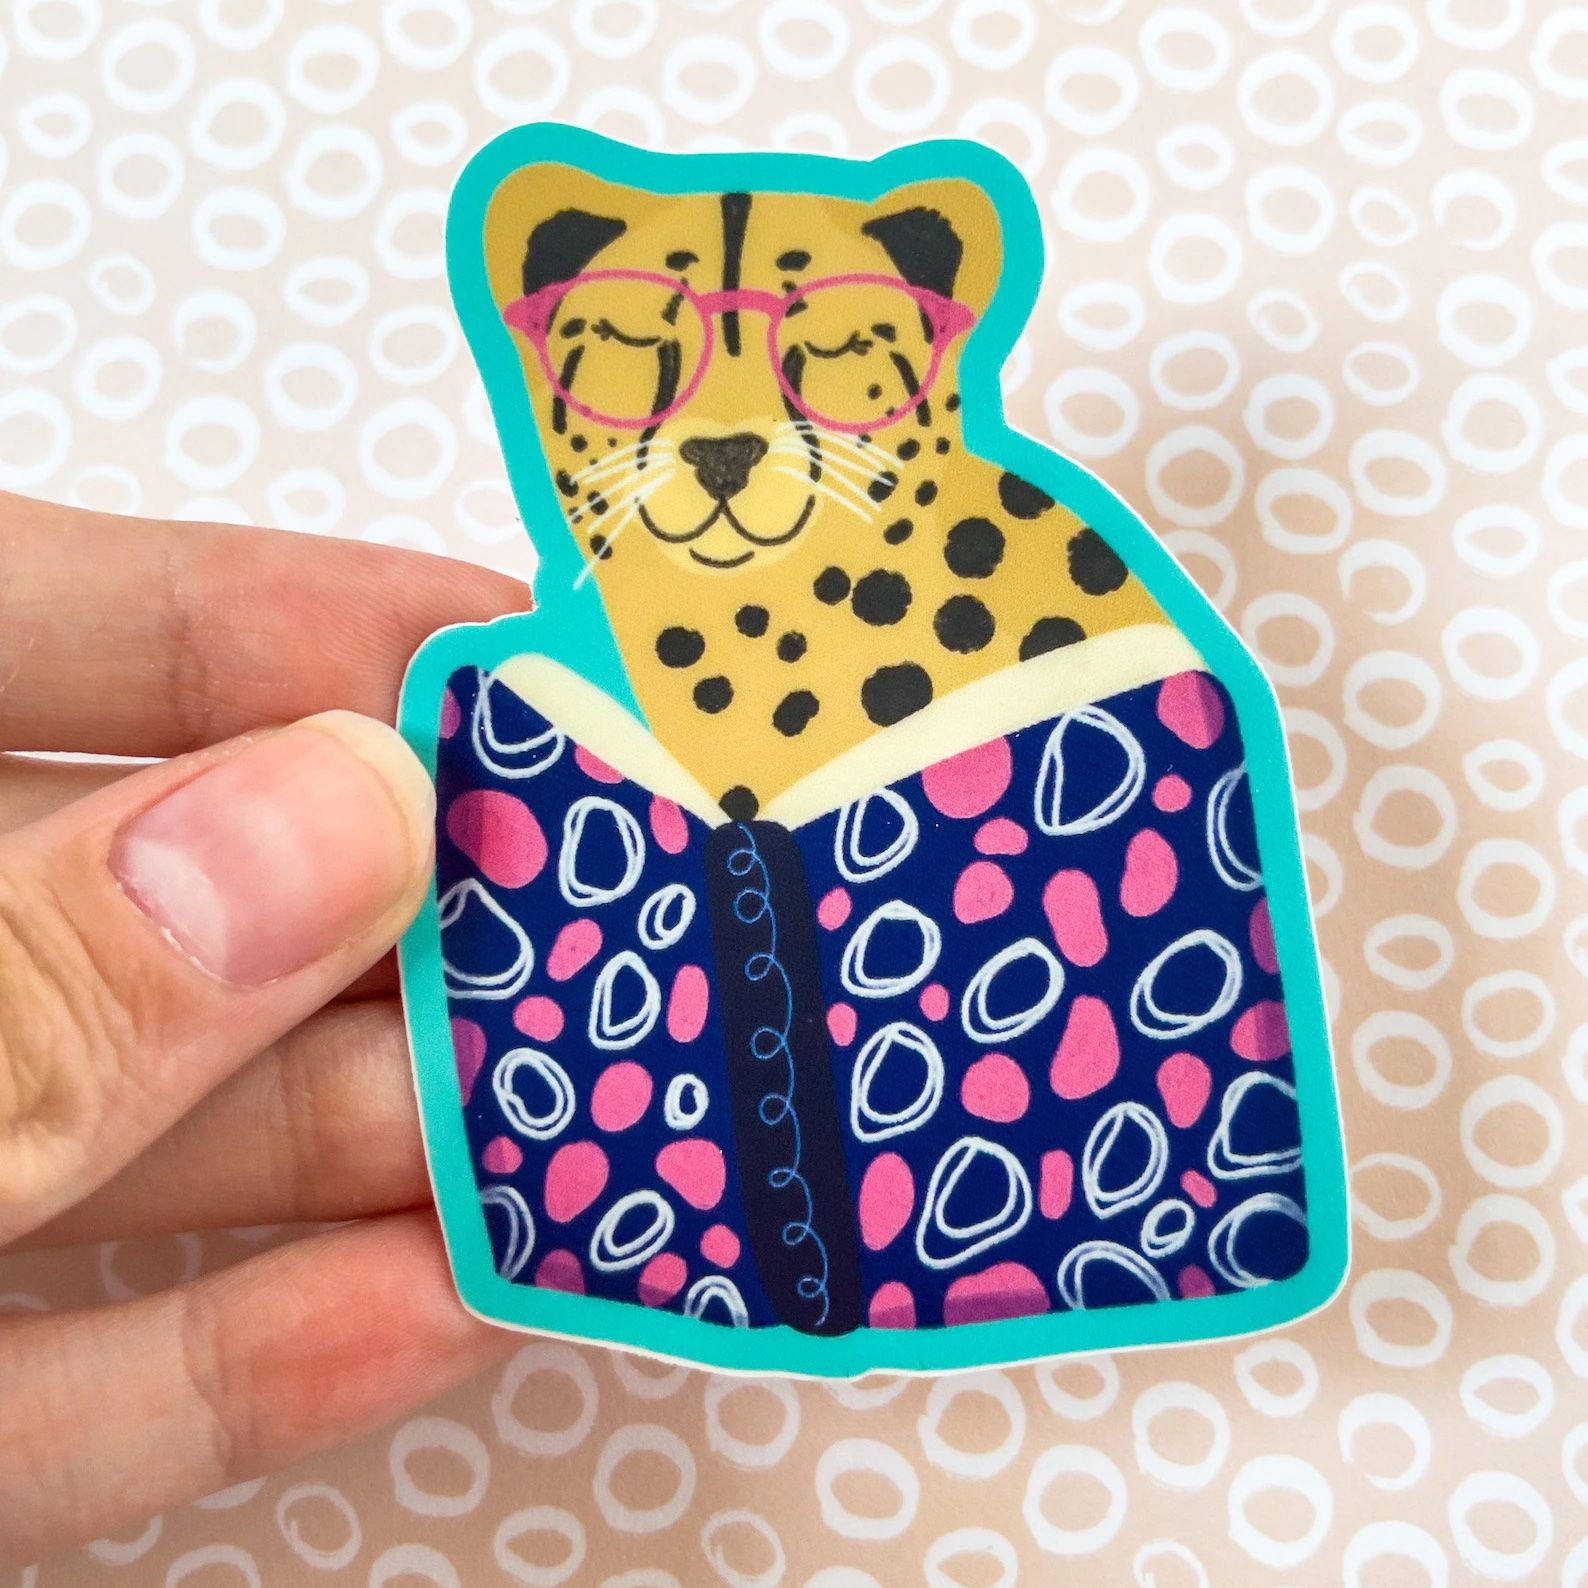 A sticker depicting a cheetah in pink glasses reading a book that is decorated with blue, pink, and white squiggles.